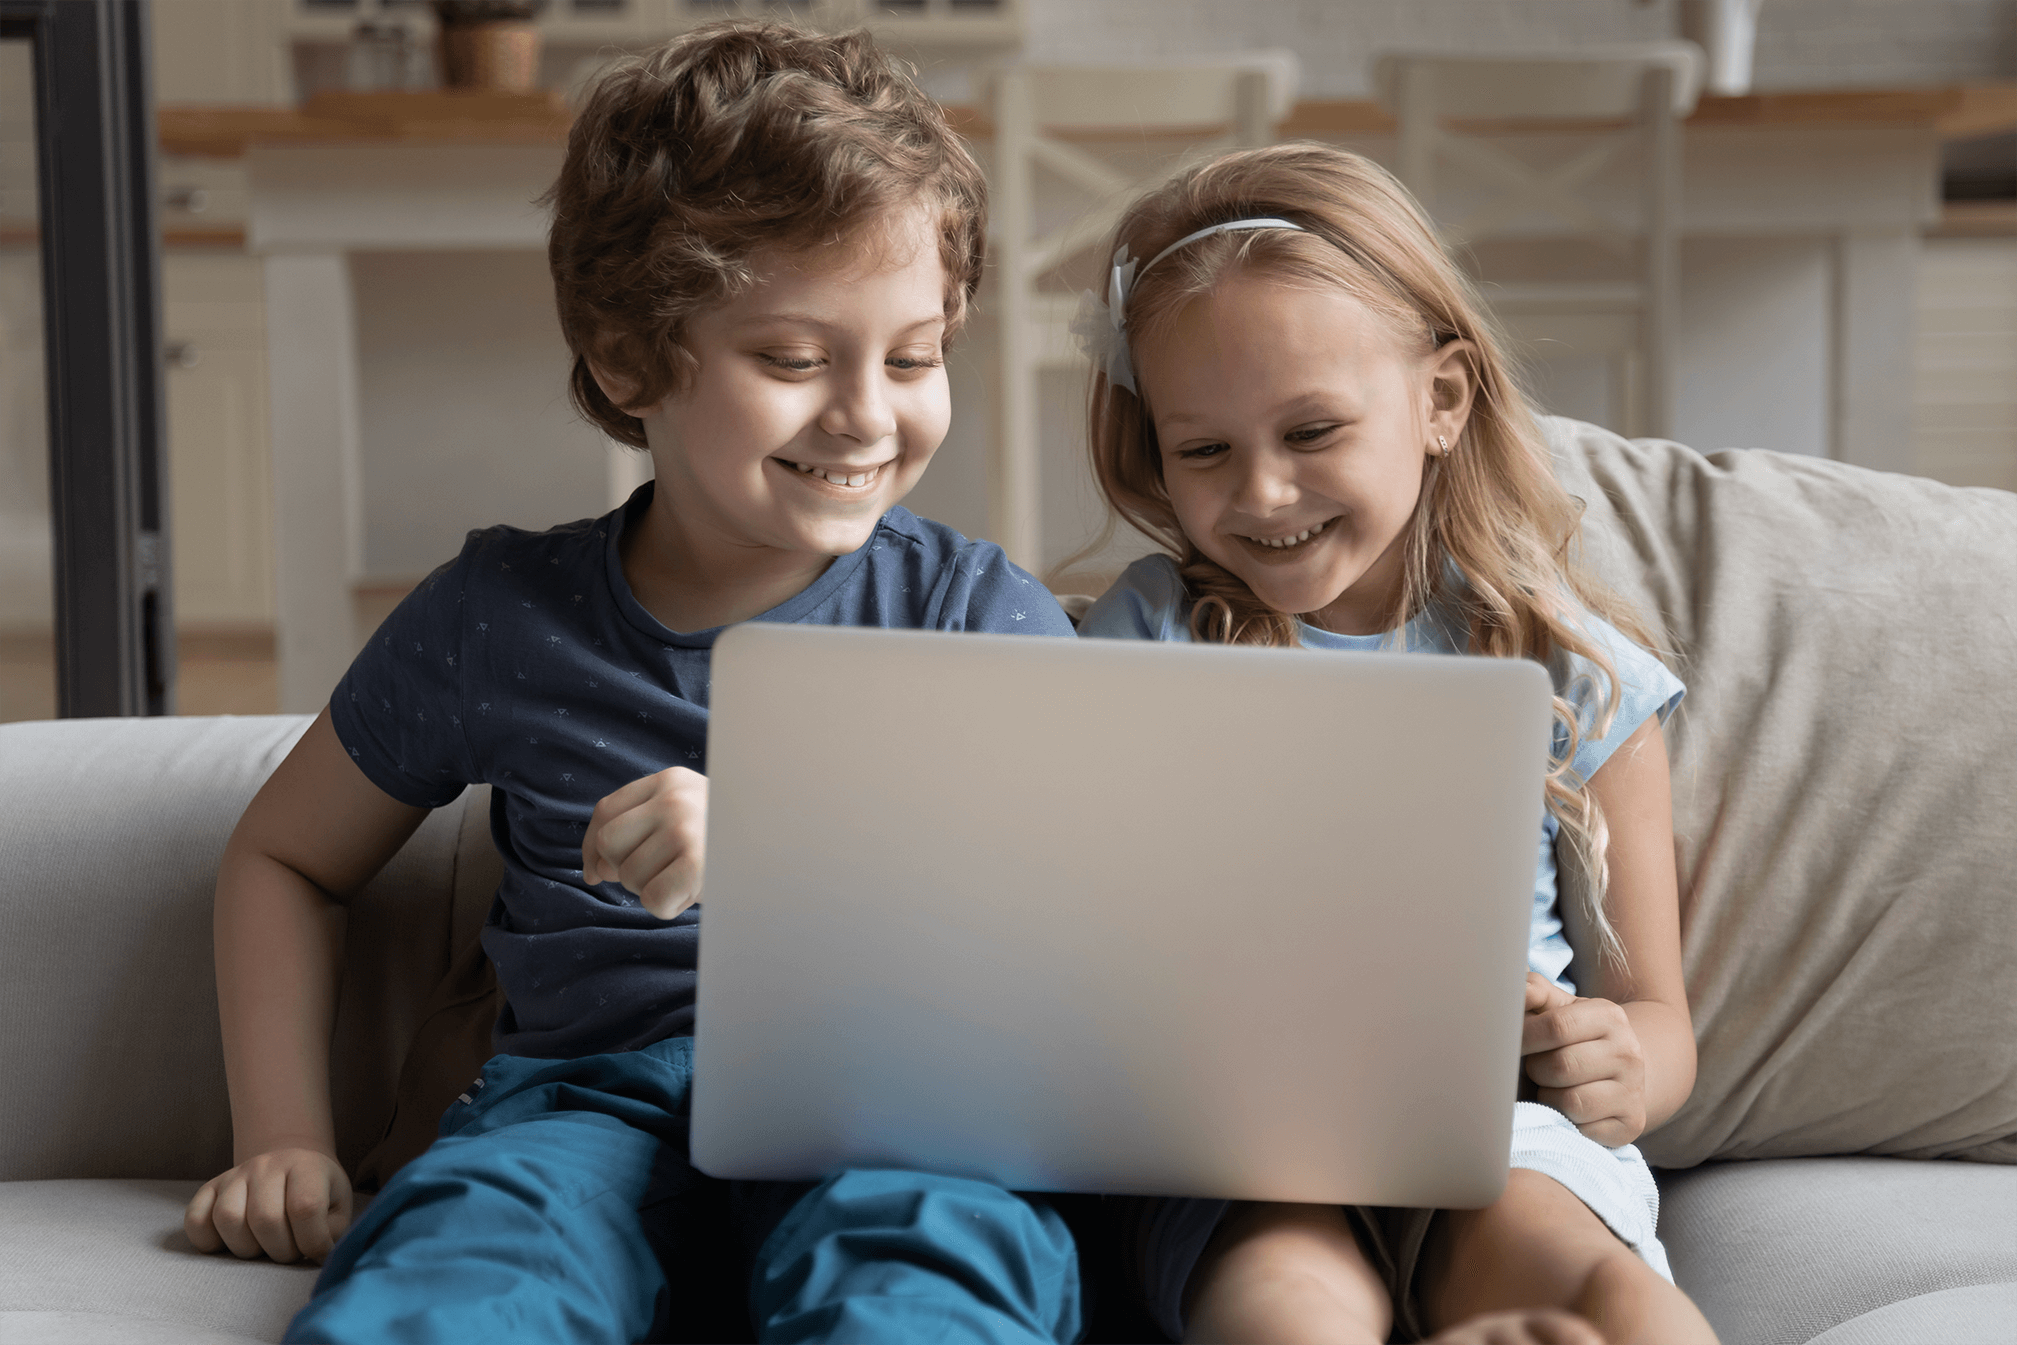 2 kids sharing a computer on a couch